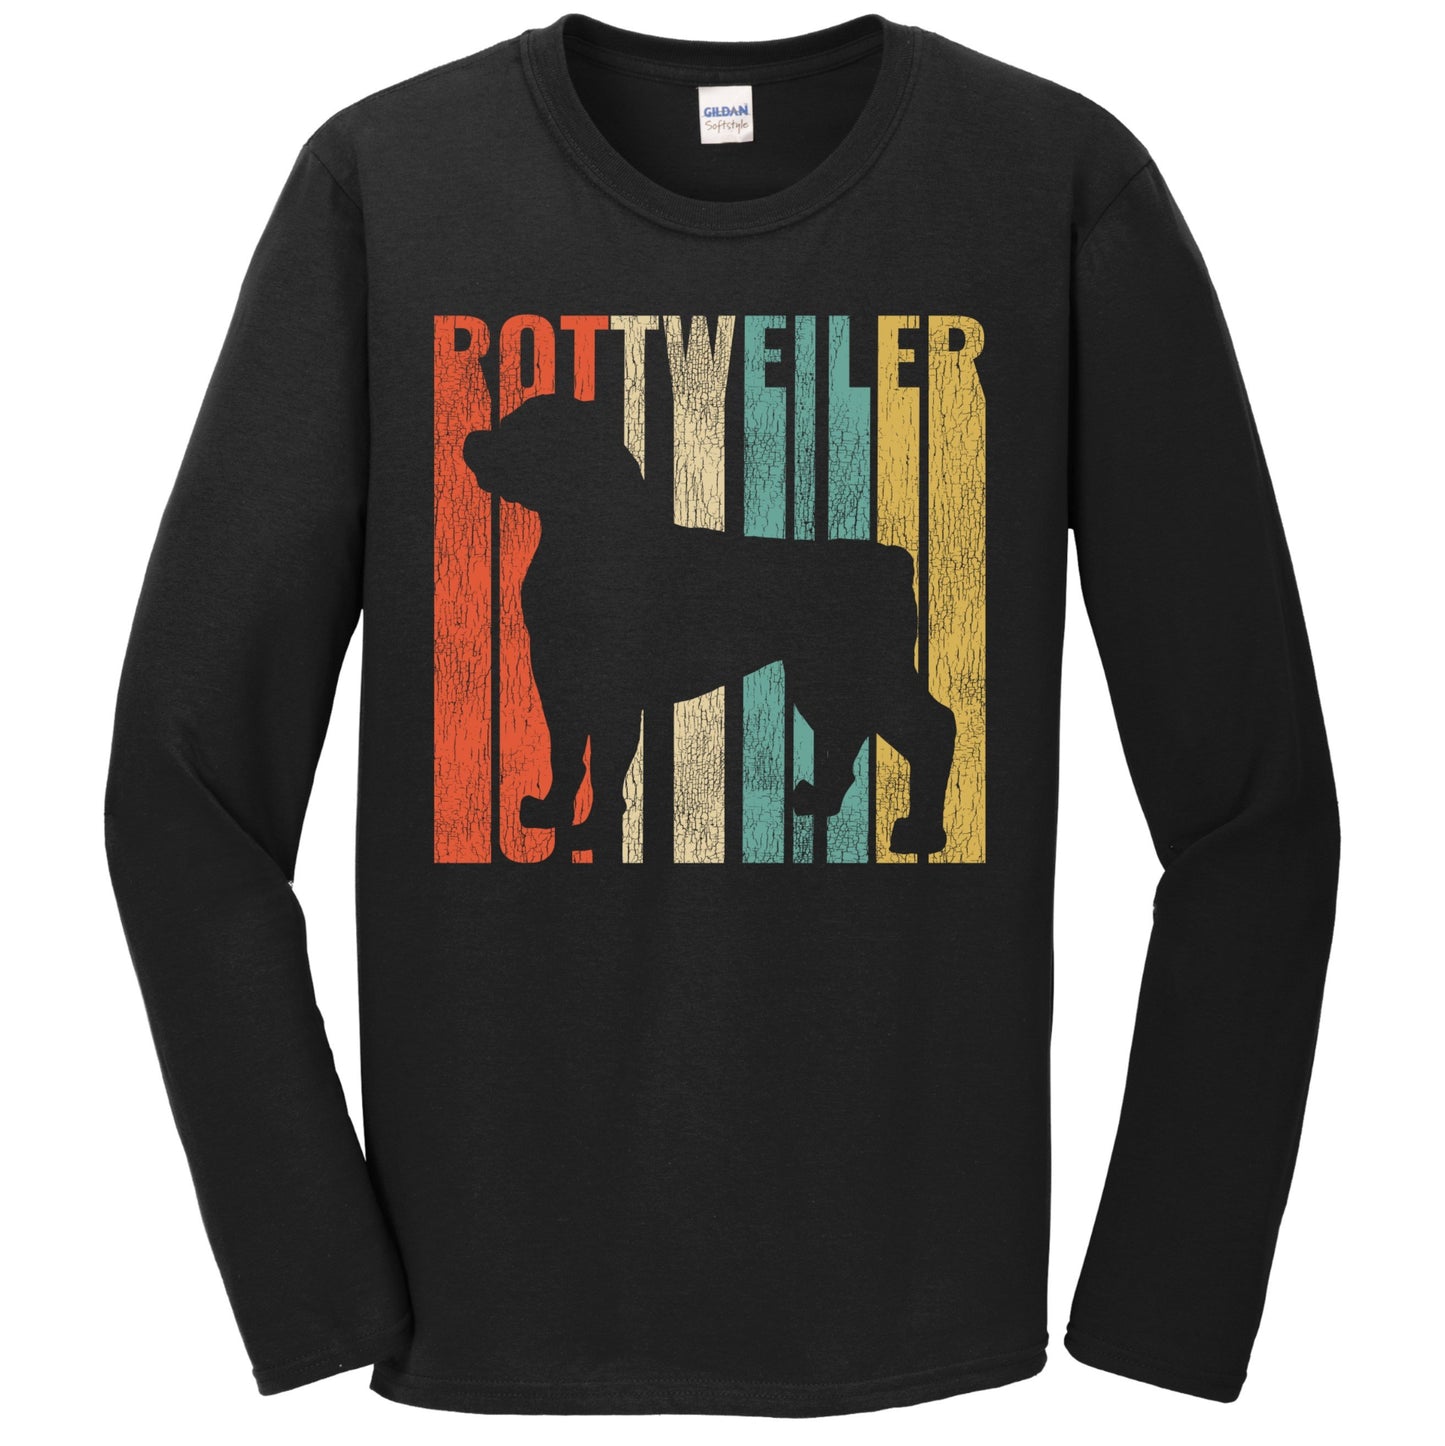 Retro 1970's Style Rottweiler Dog Silhouette Cracked Distressed Long Sleeve T-Shirt